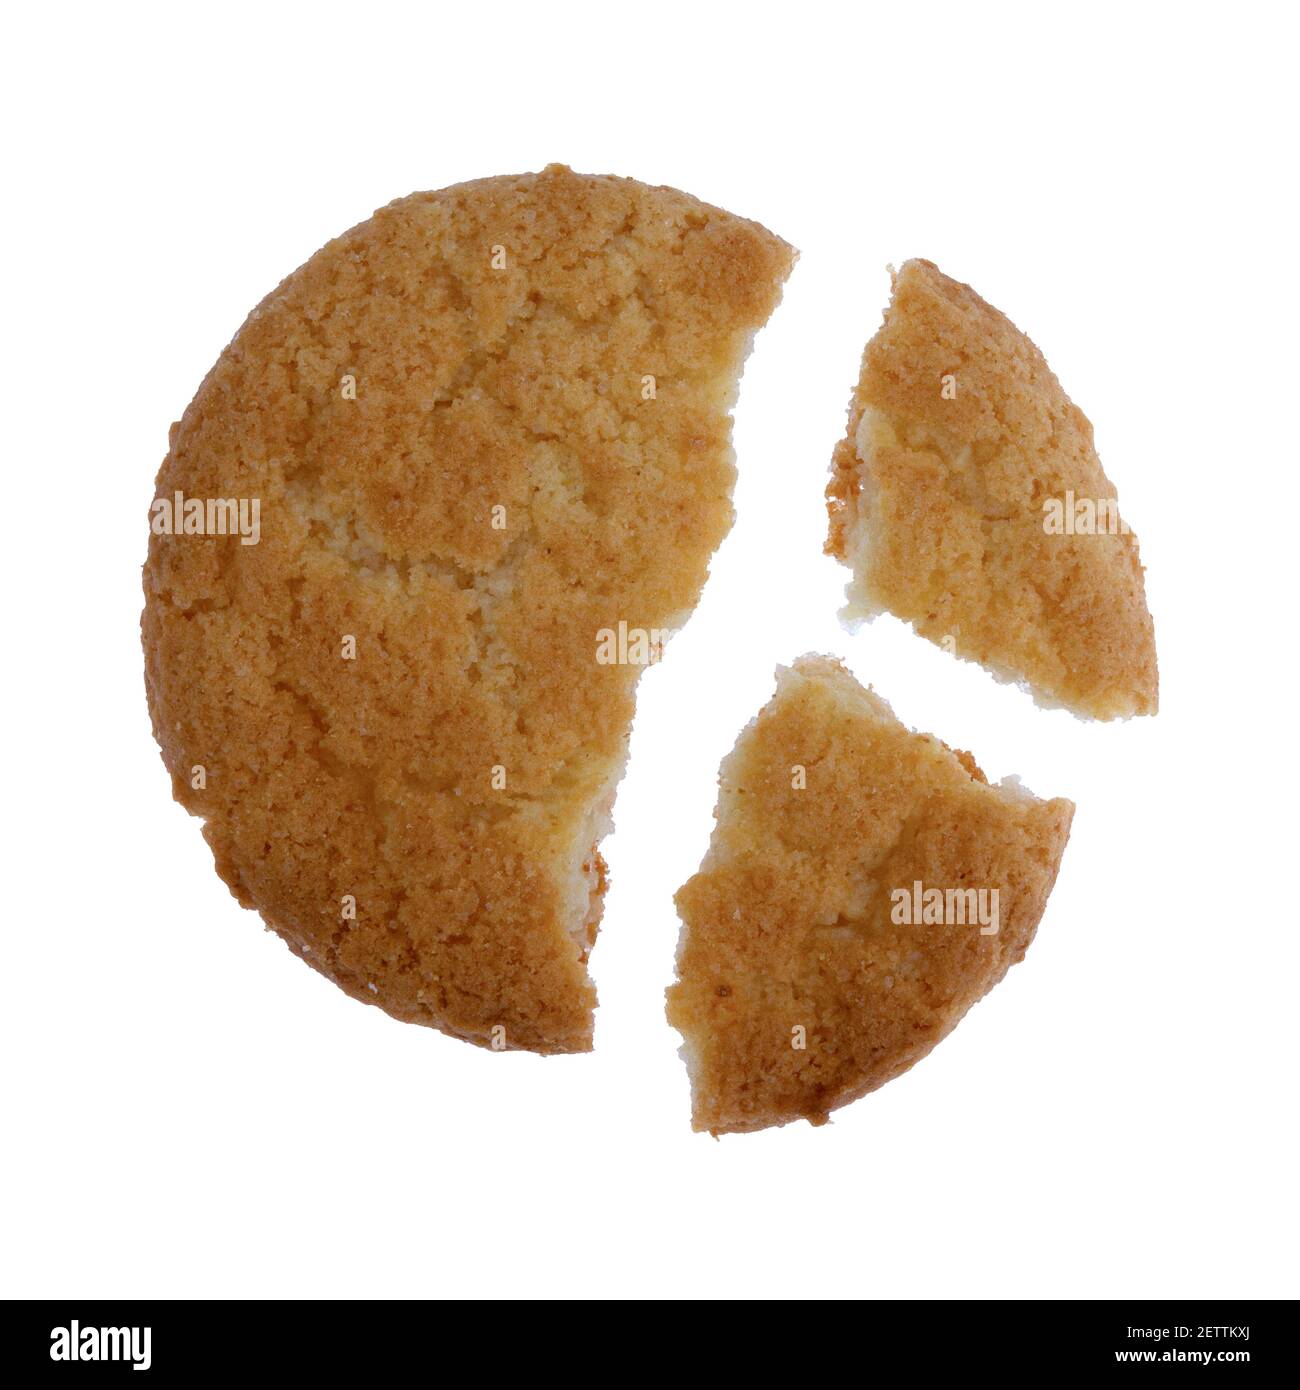 Single coconut flavor cookie that is broken in three pieces isolated on a white background. Stock Photo